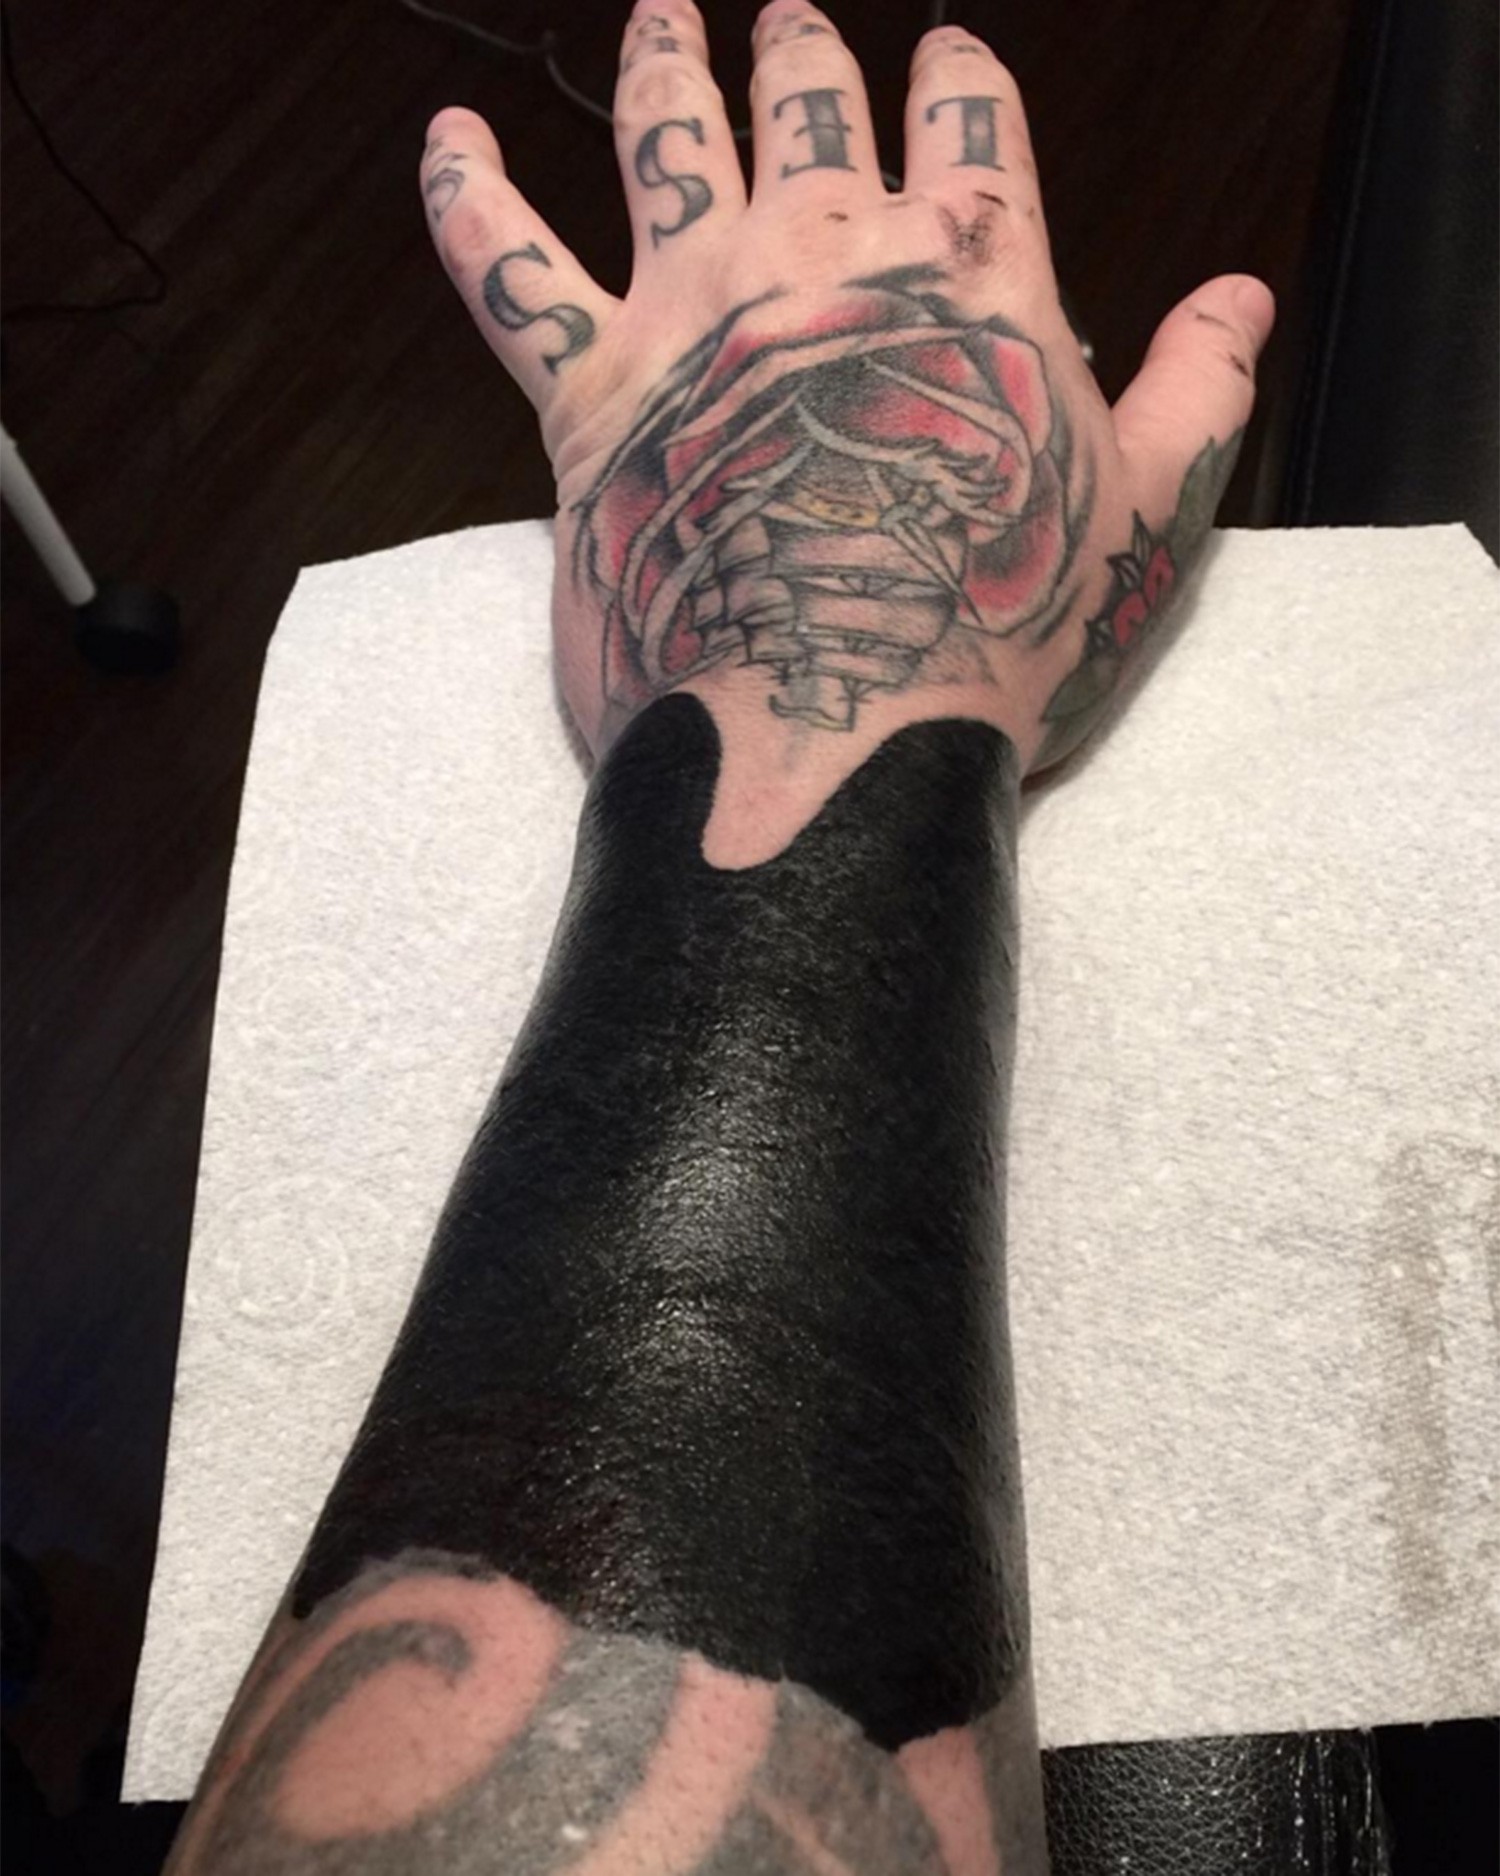 The new tattoo trend is called “blackout tattoos” (pics